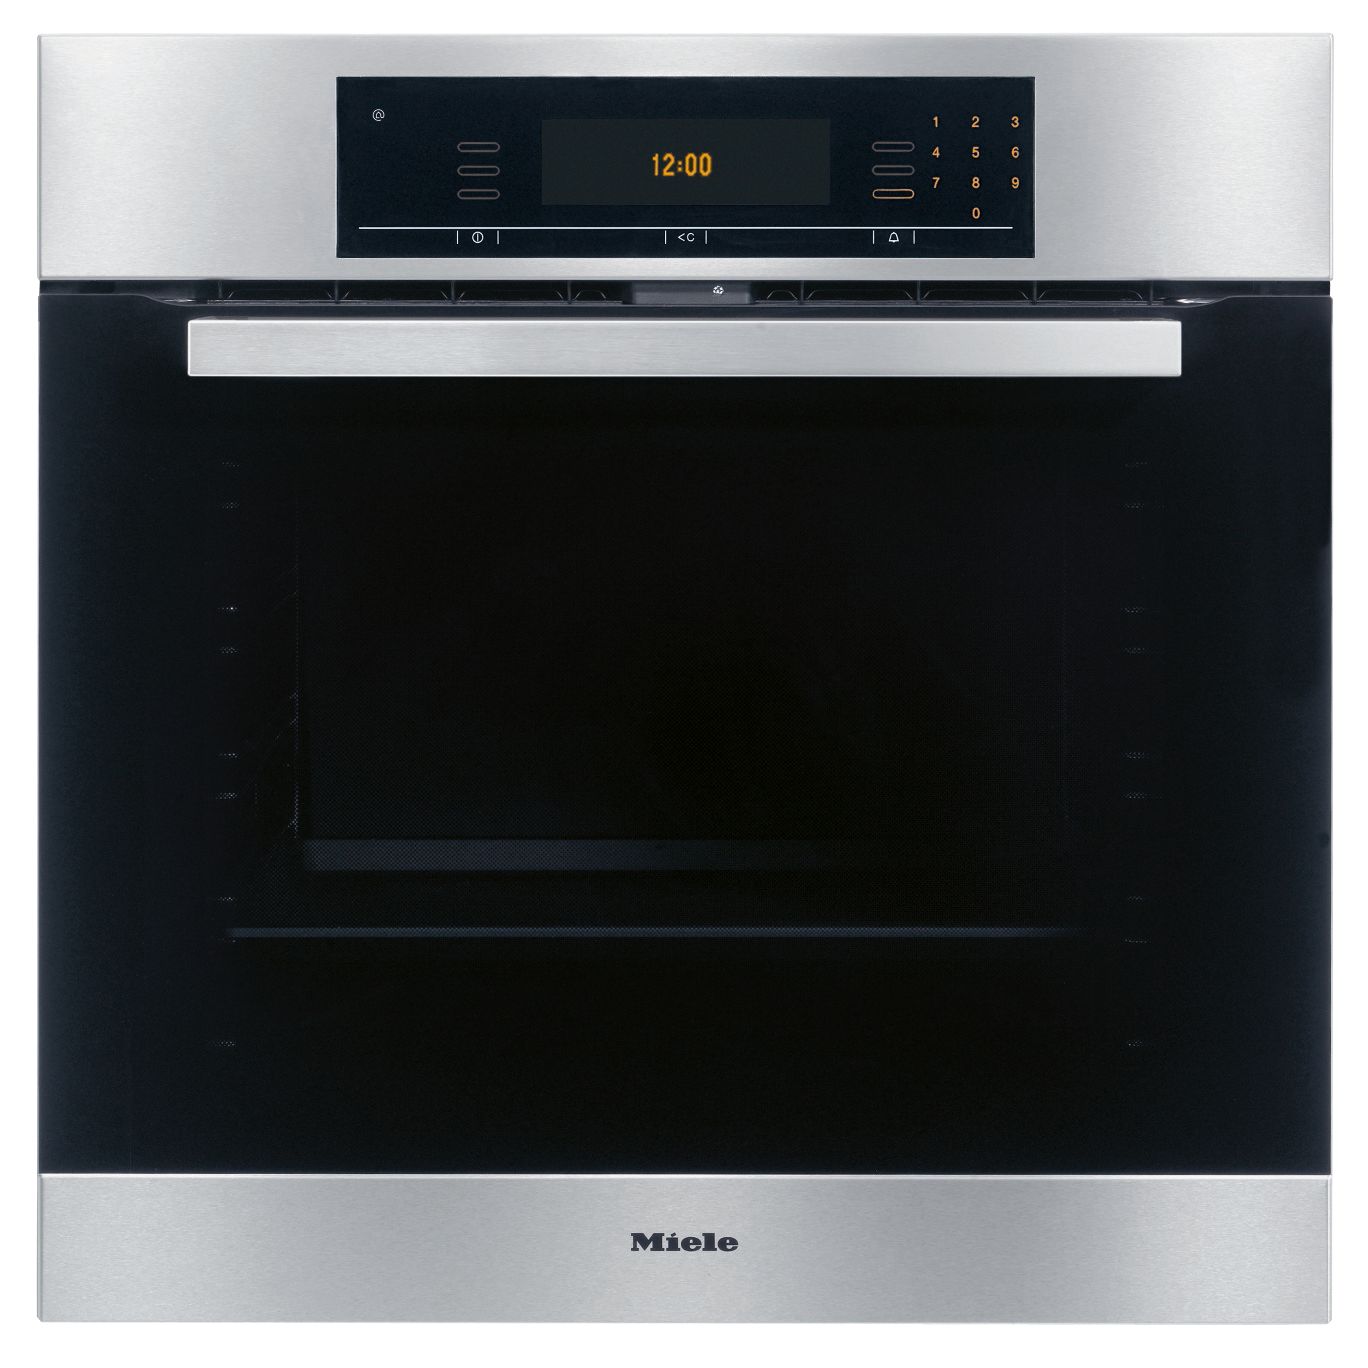 Miele H5681BP Single Electric Oven, Stainless Steel at JohnLewis